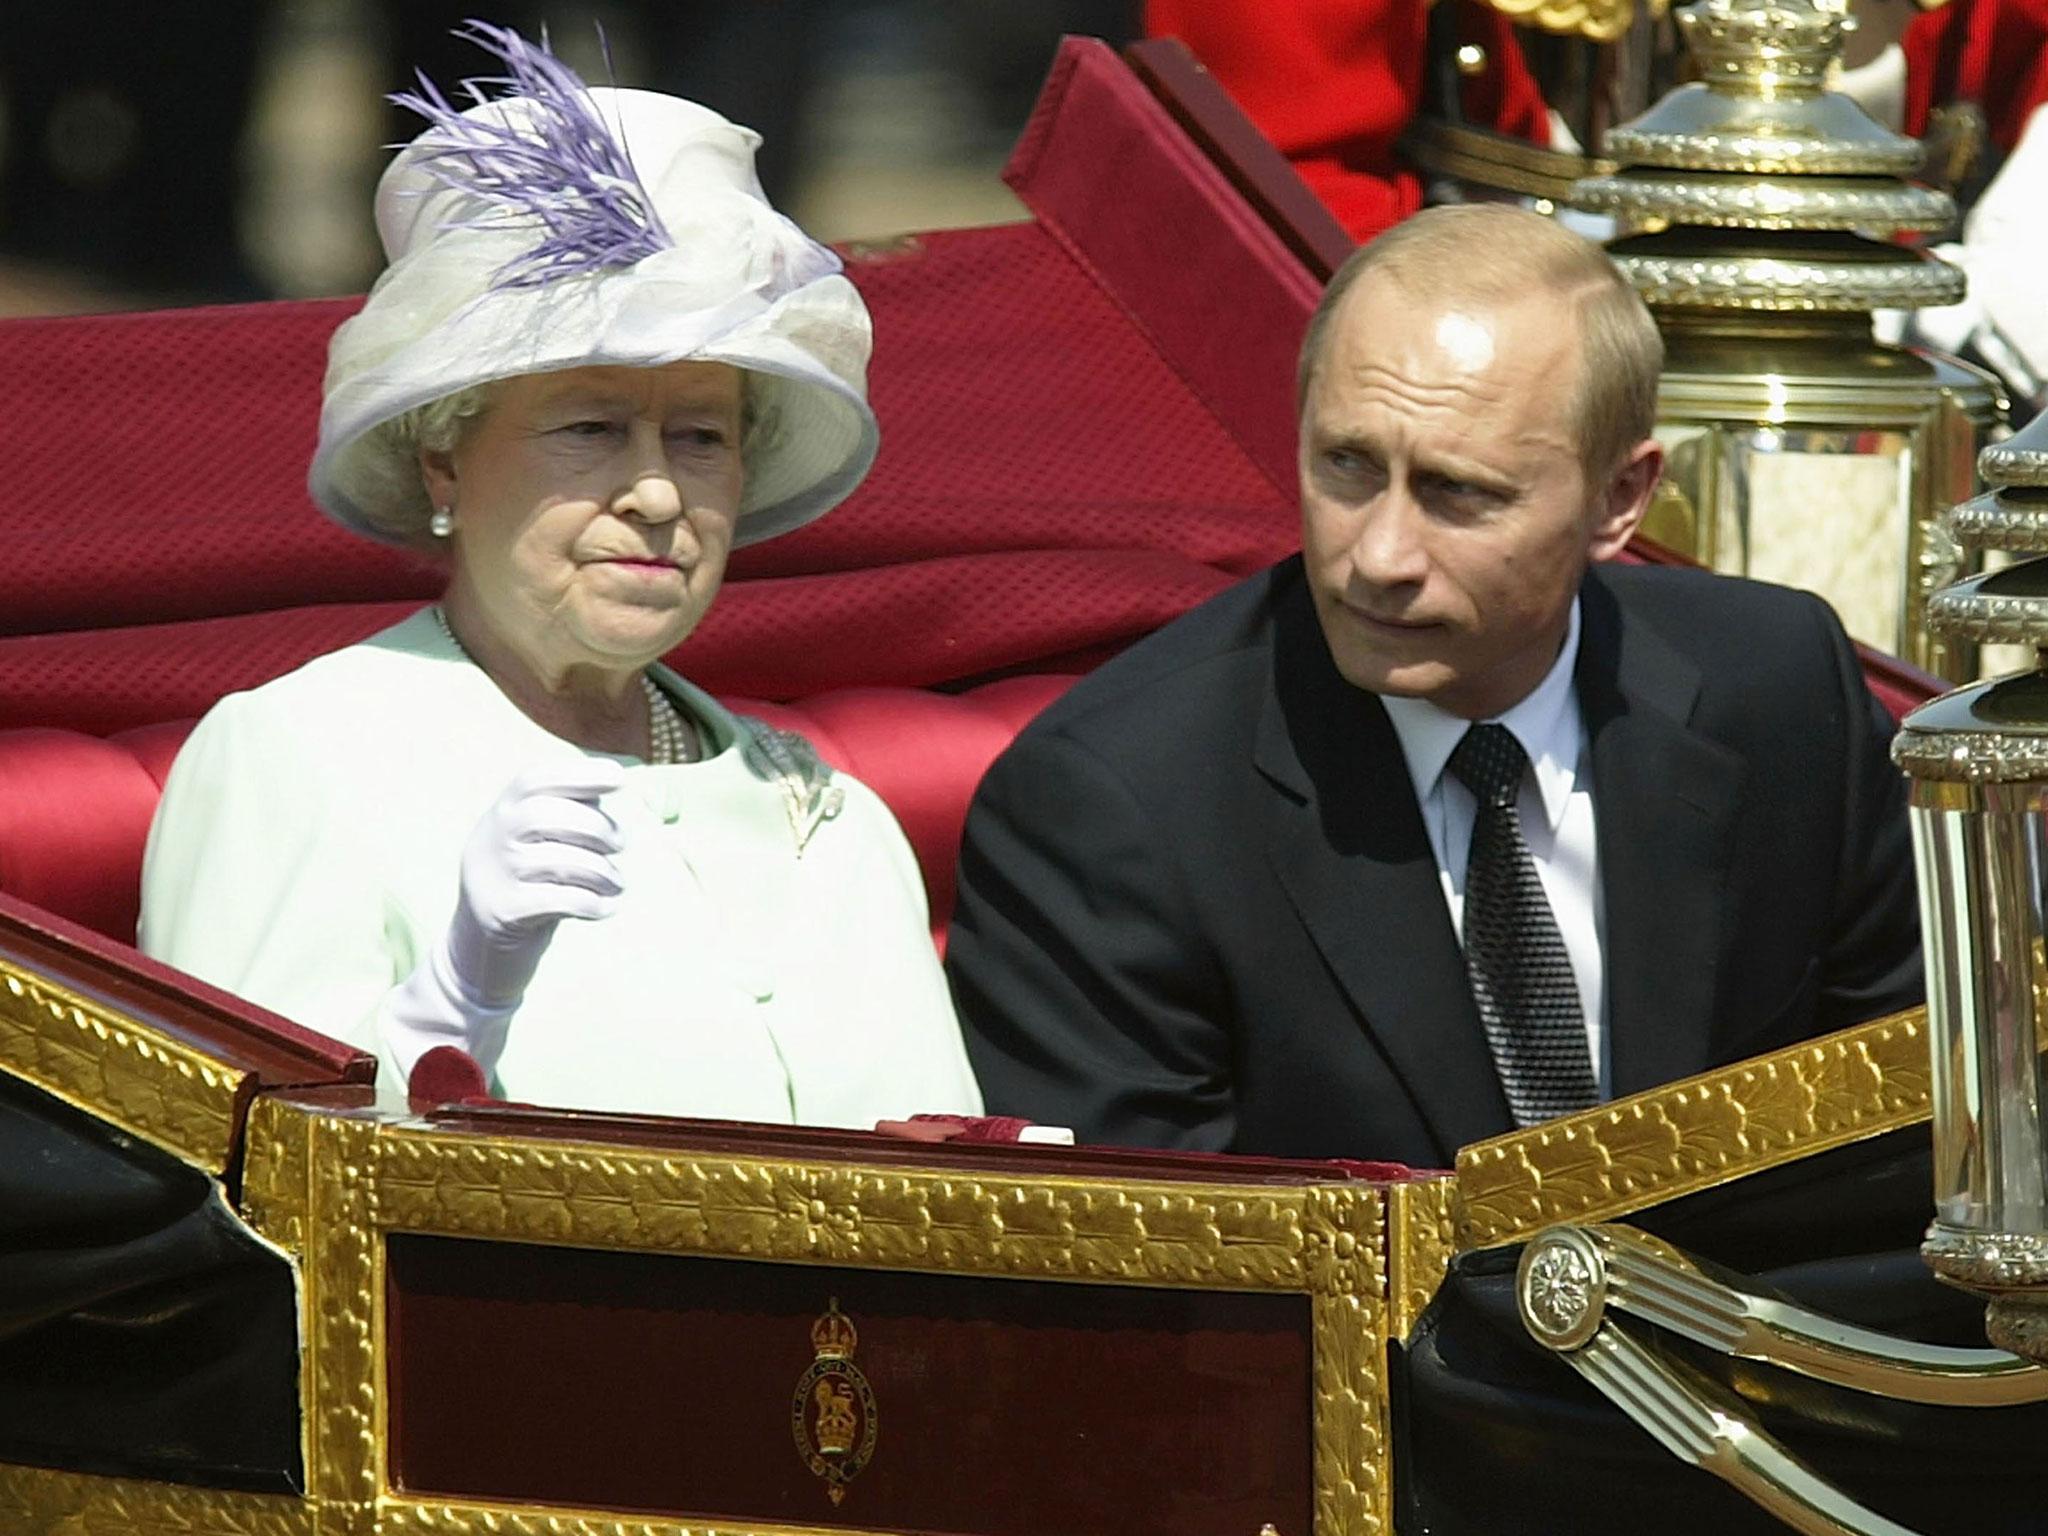 The Russian President kept the Queen waiting for 14 minutes before their meeting in 2003